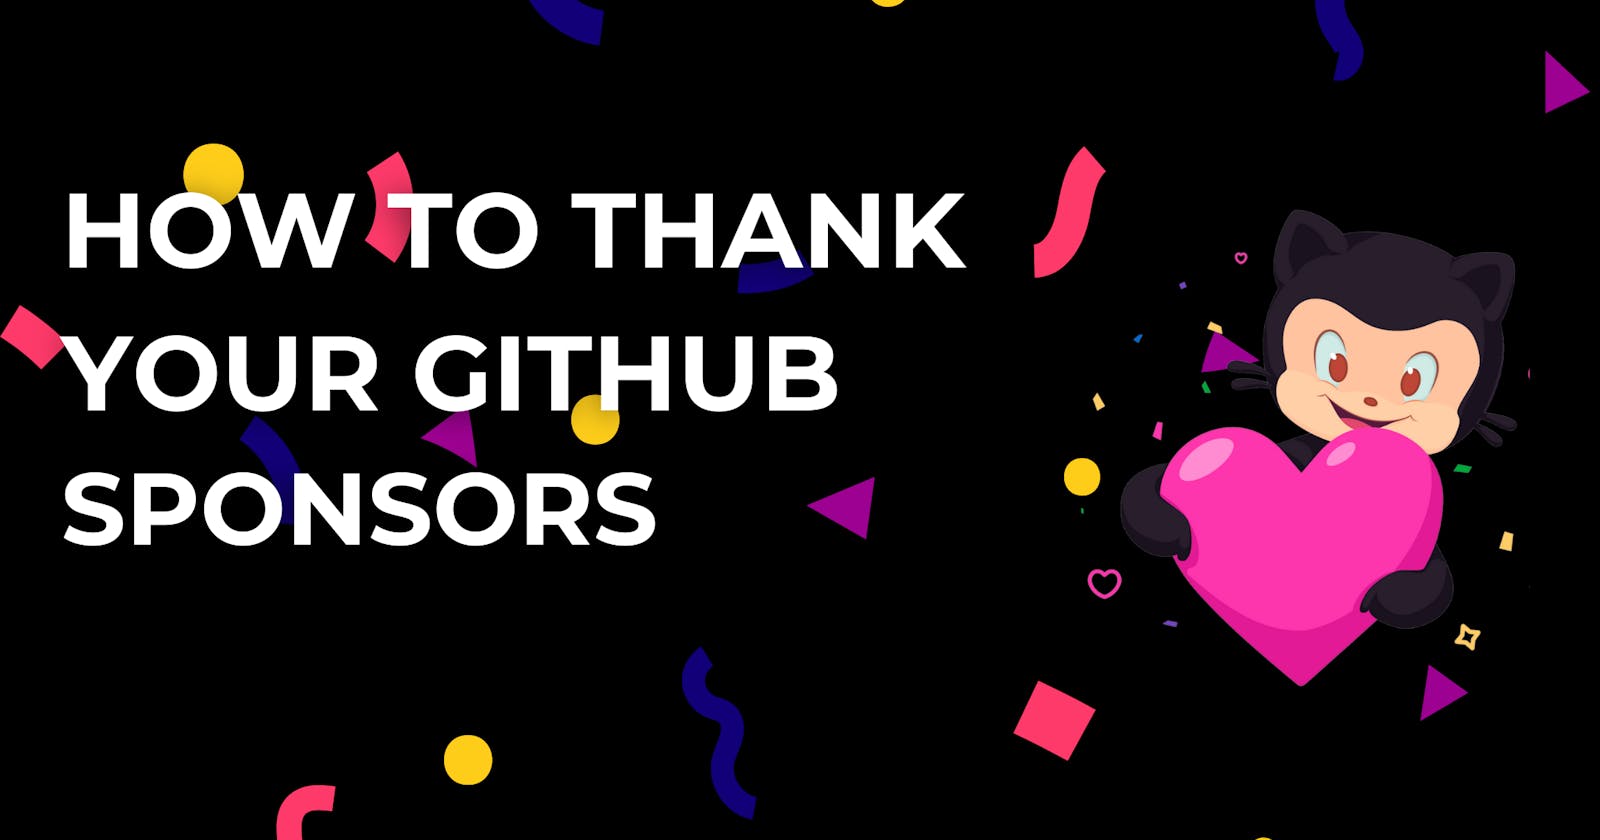 How to Thank Sponsors for Supporting Your Open Source Project